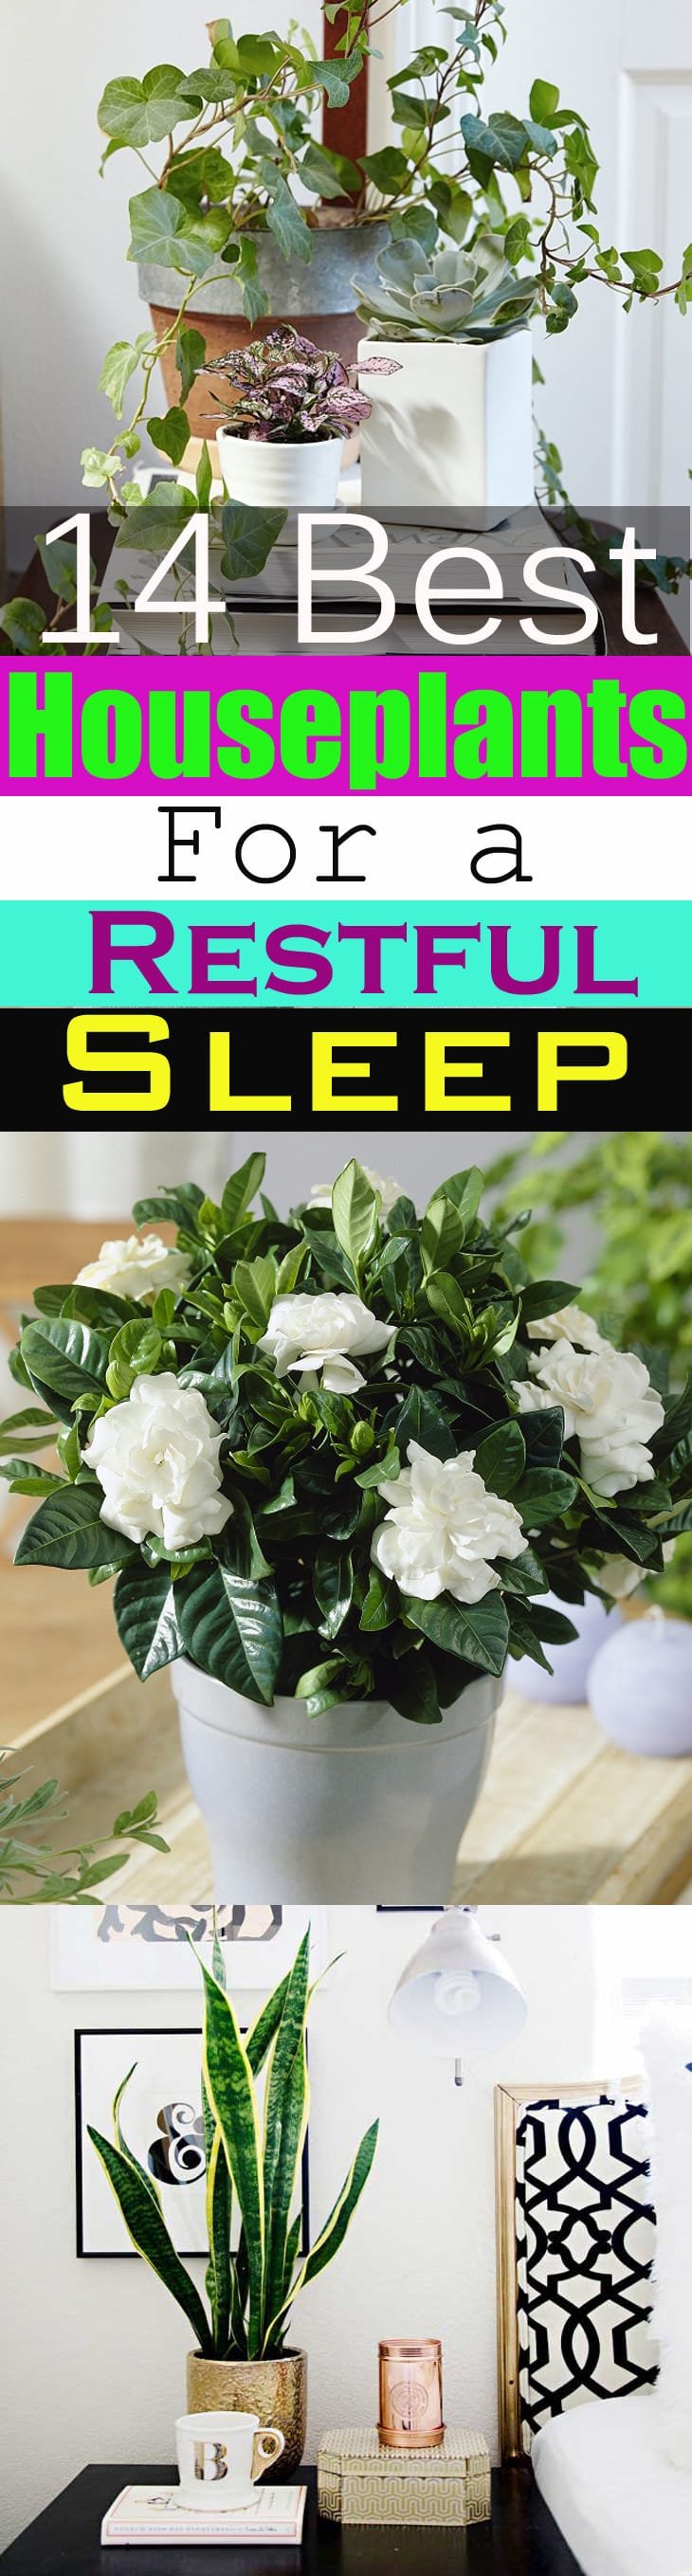 Plants grown indoors bring nature into the home but do you know there are plants that can help you sleep better? 14 Best Houseplants for a Restful Sleep. Take a look!